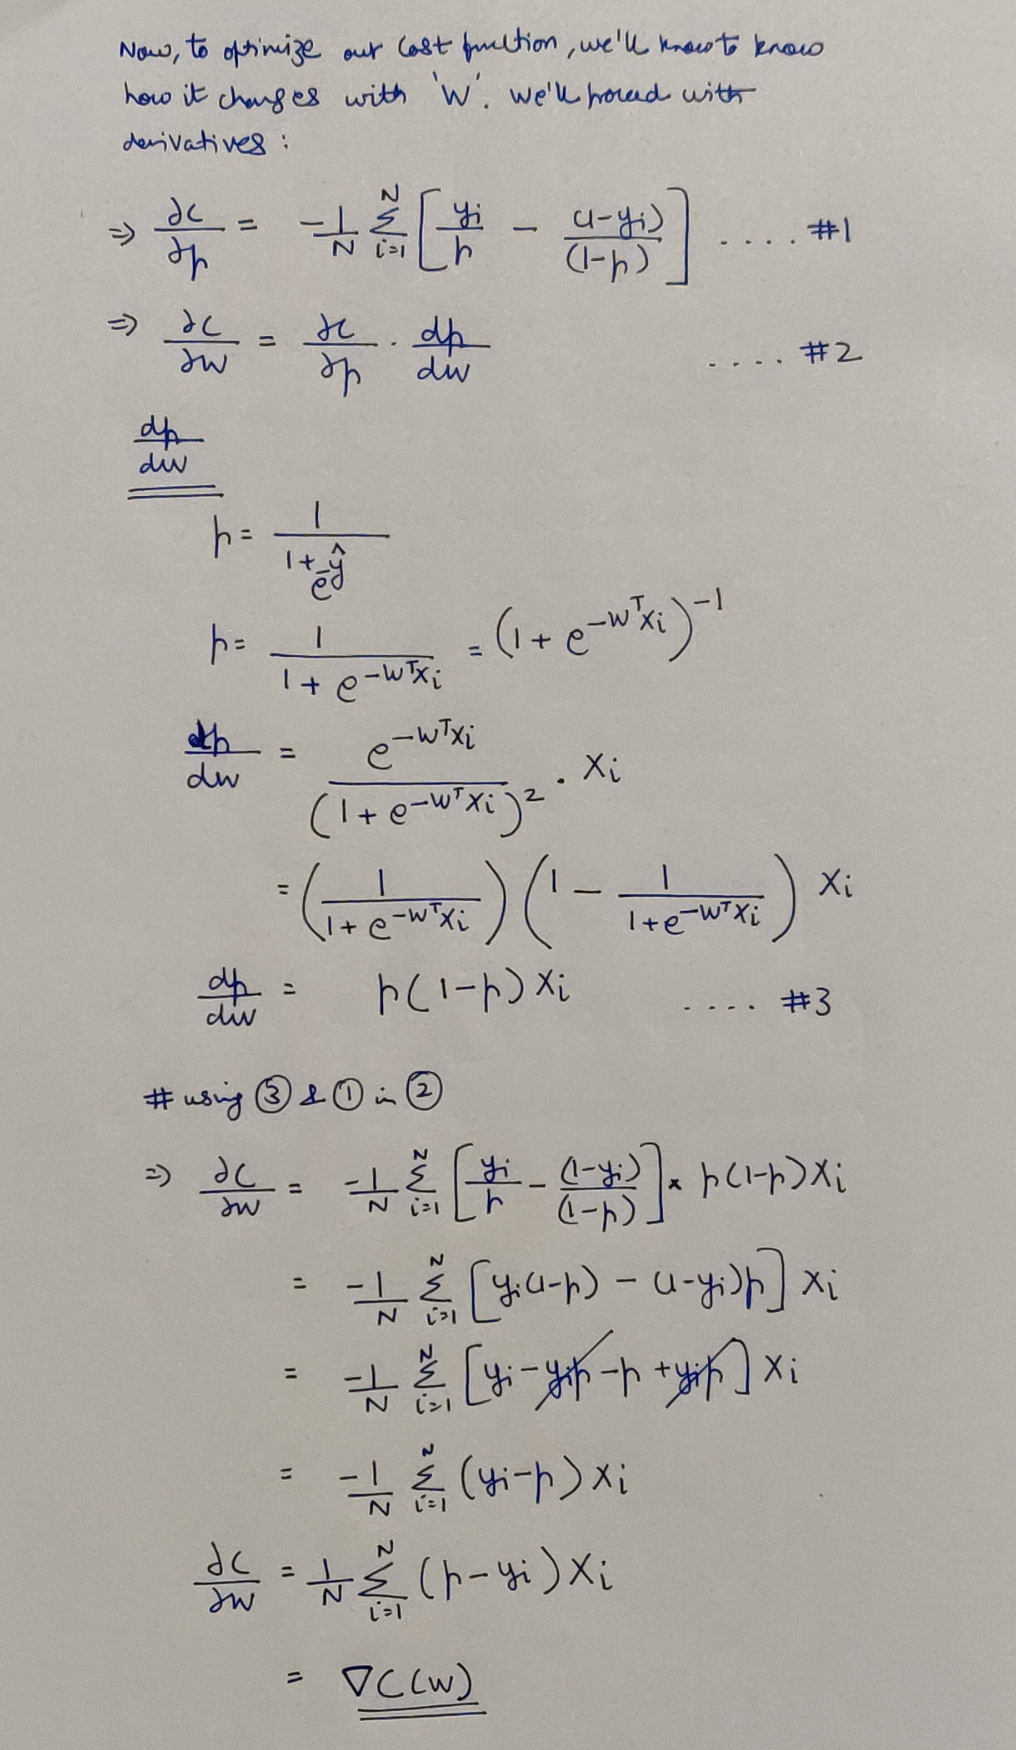 Finding the gradient of the cost function